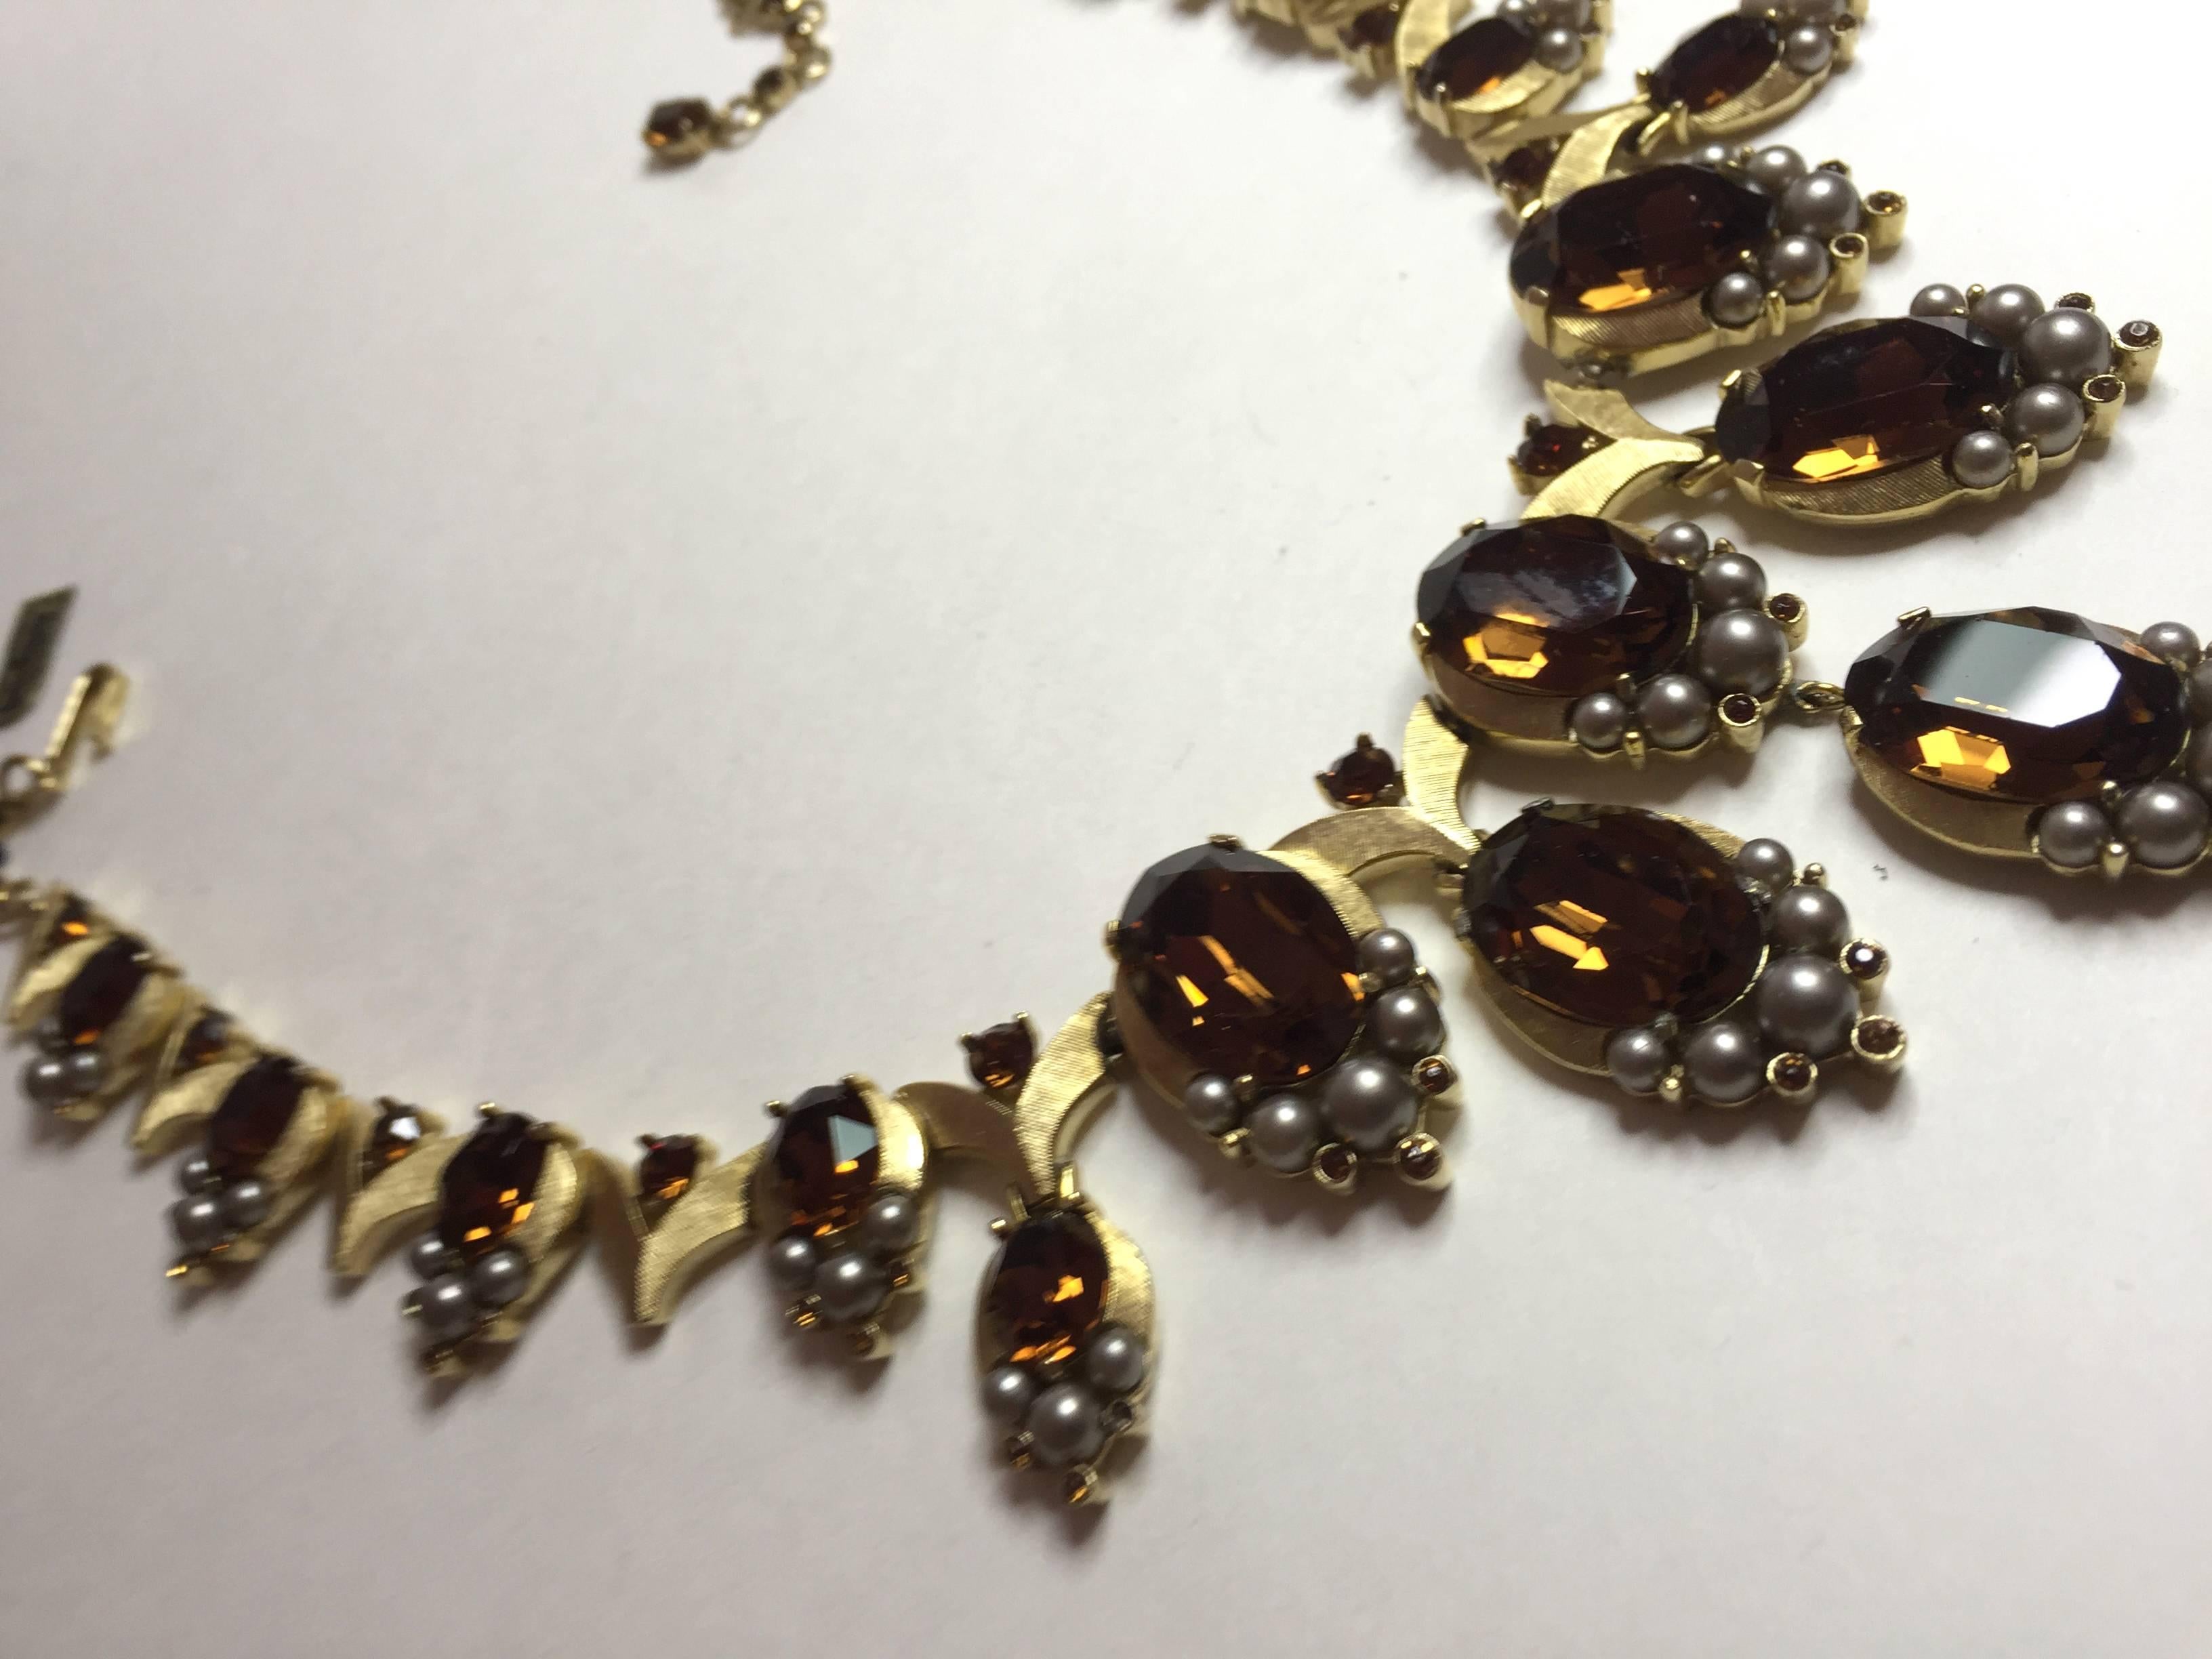 Glamorous 1950s TRIFARI Brushed Matte Goldtone Faux Topaz & Smoke Pearl Necklace For Sale 1